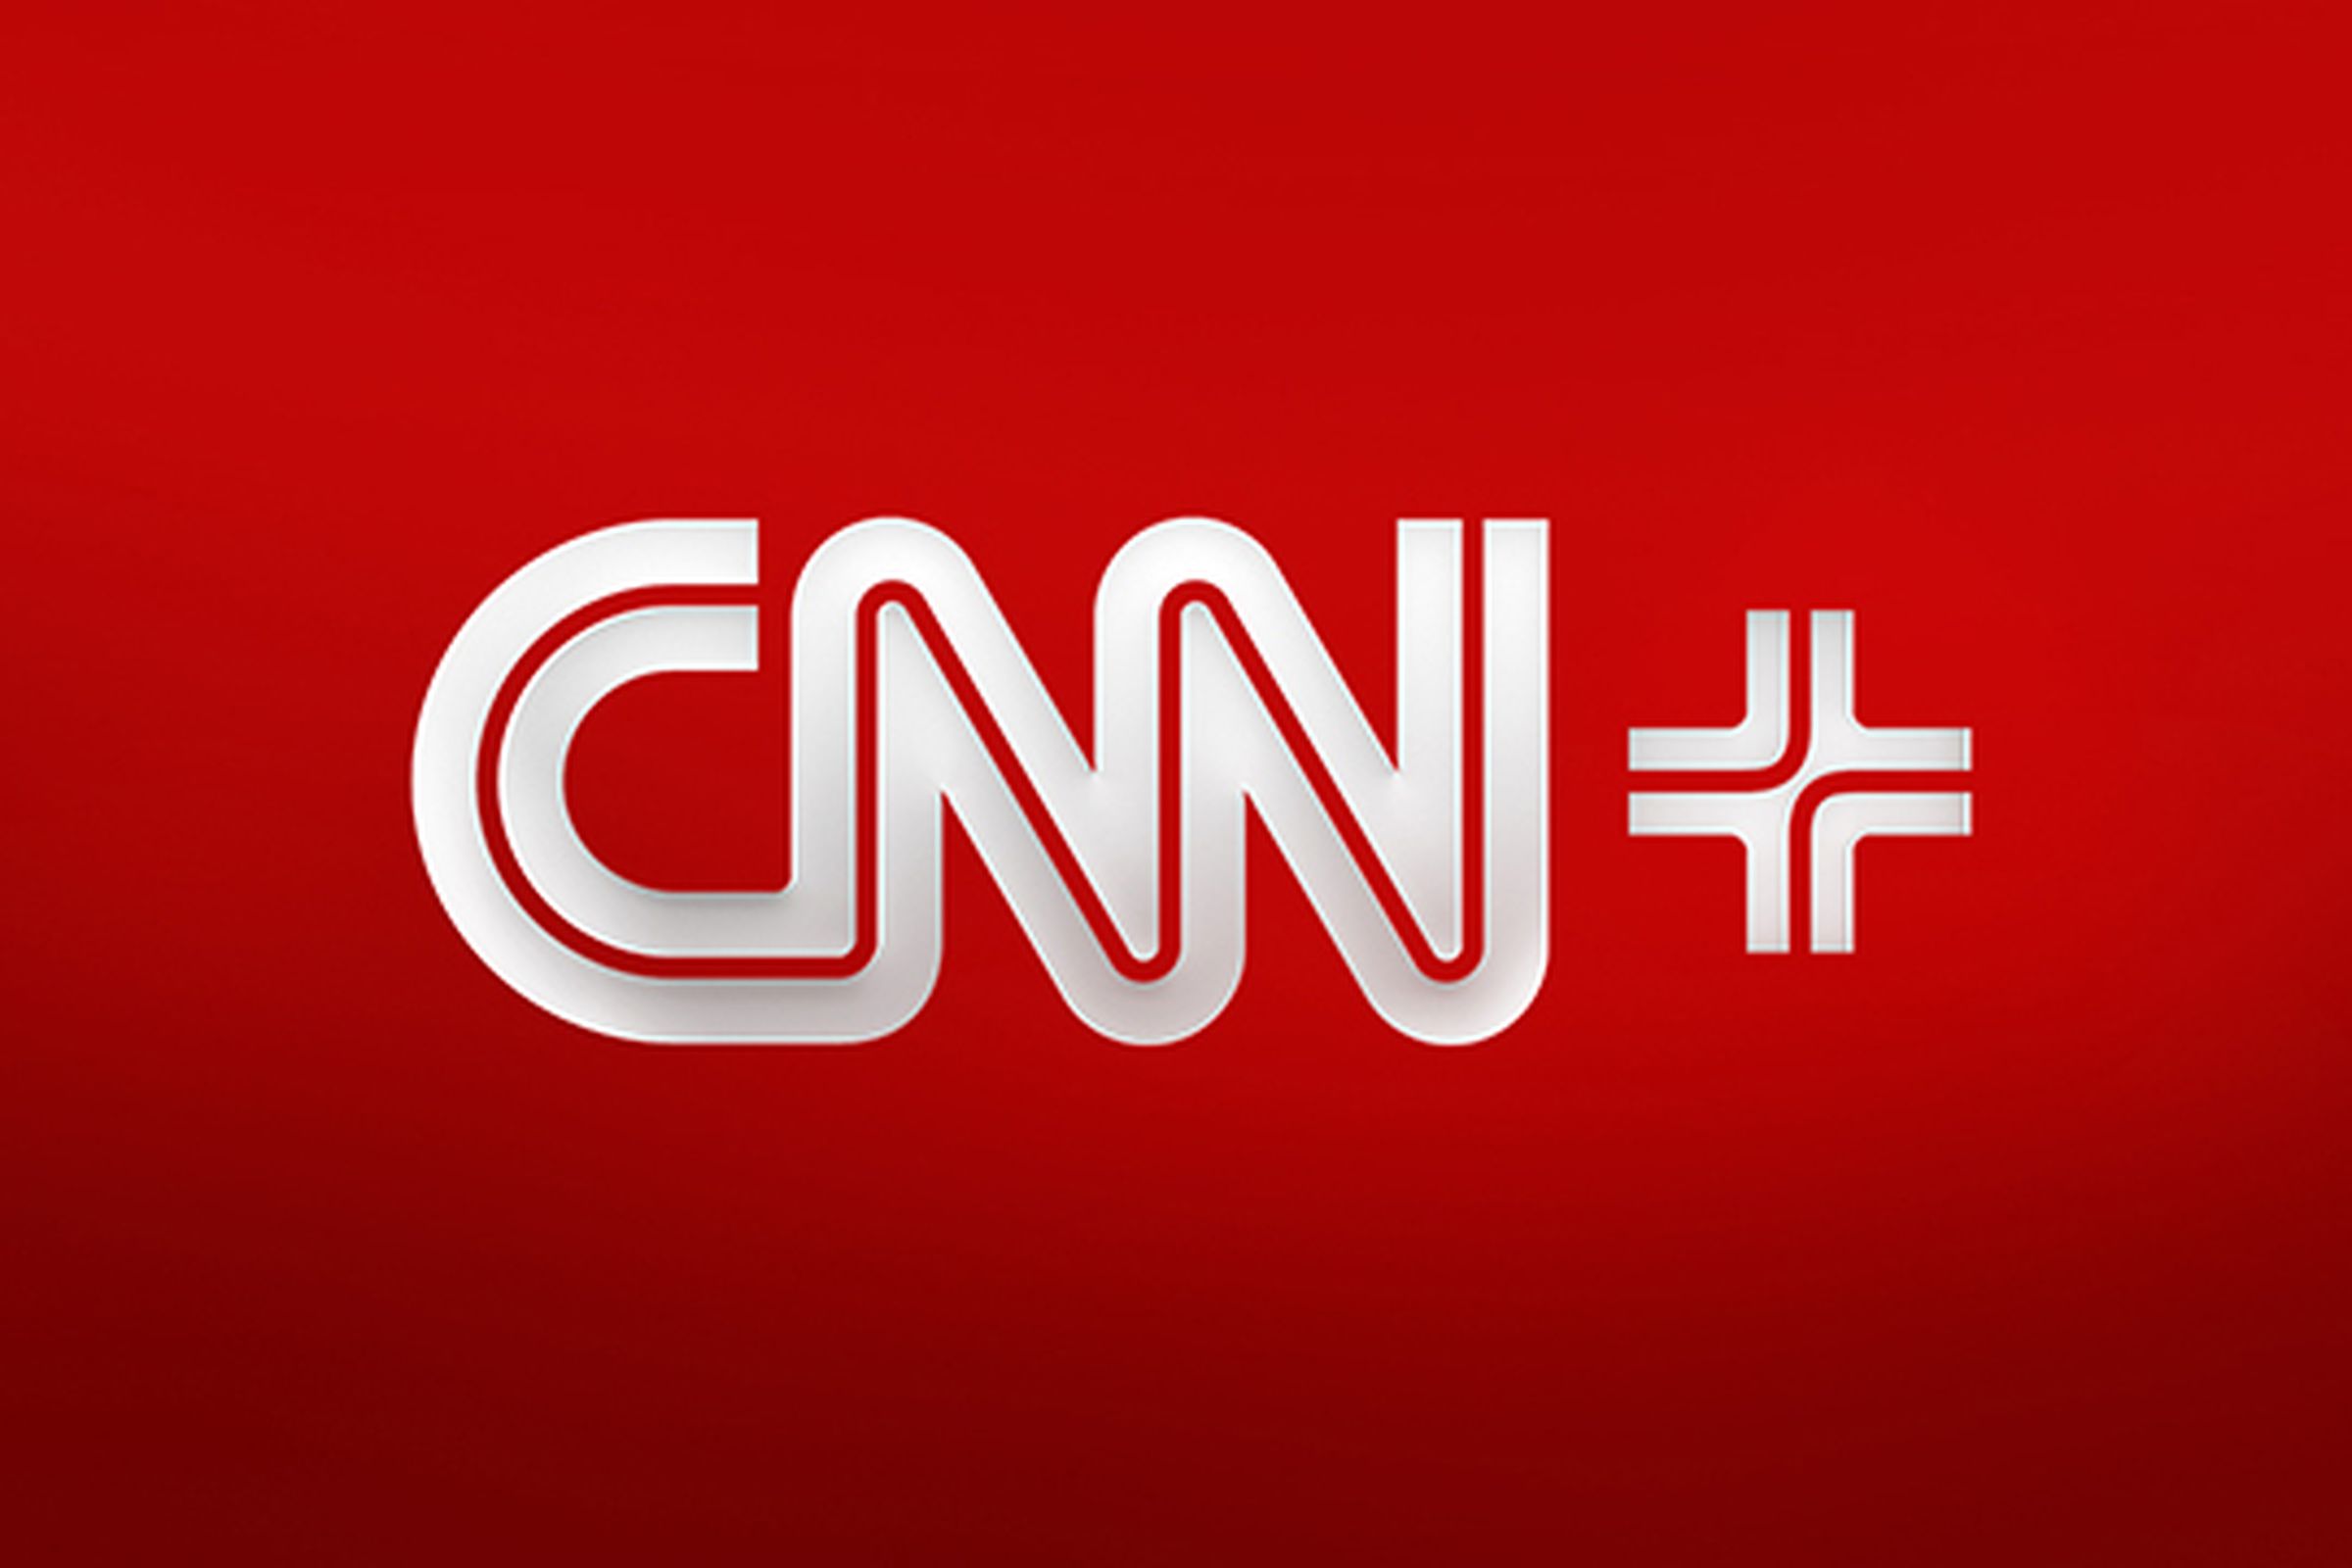 CNN Plus has announced its subscription prices